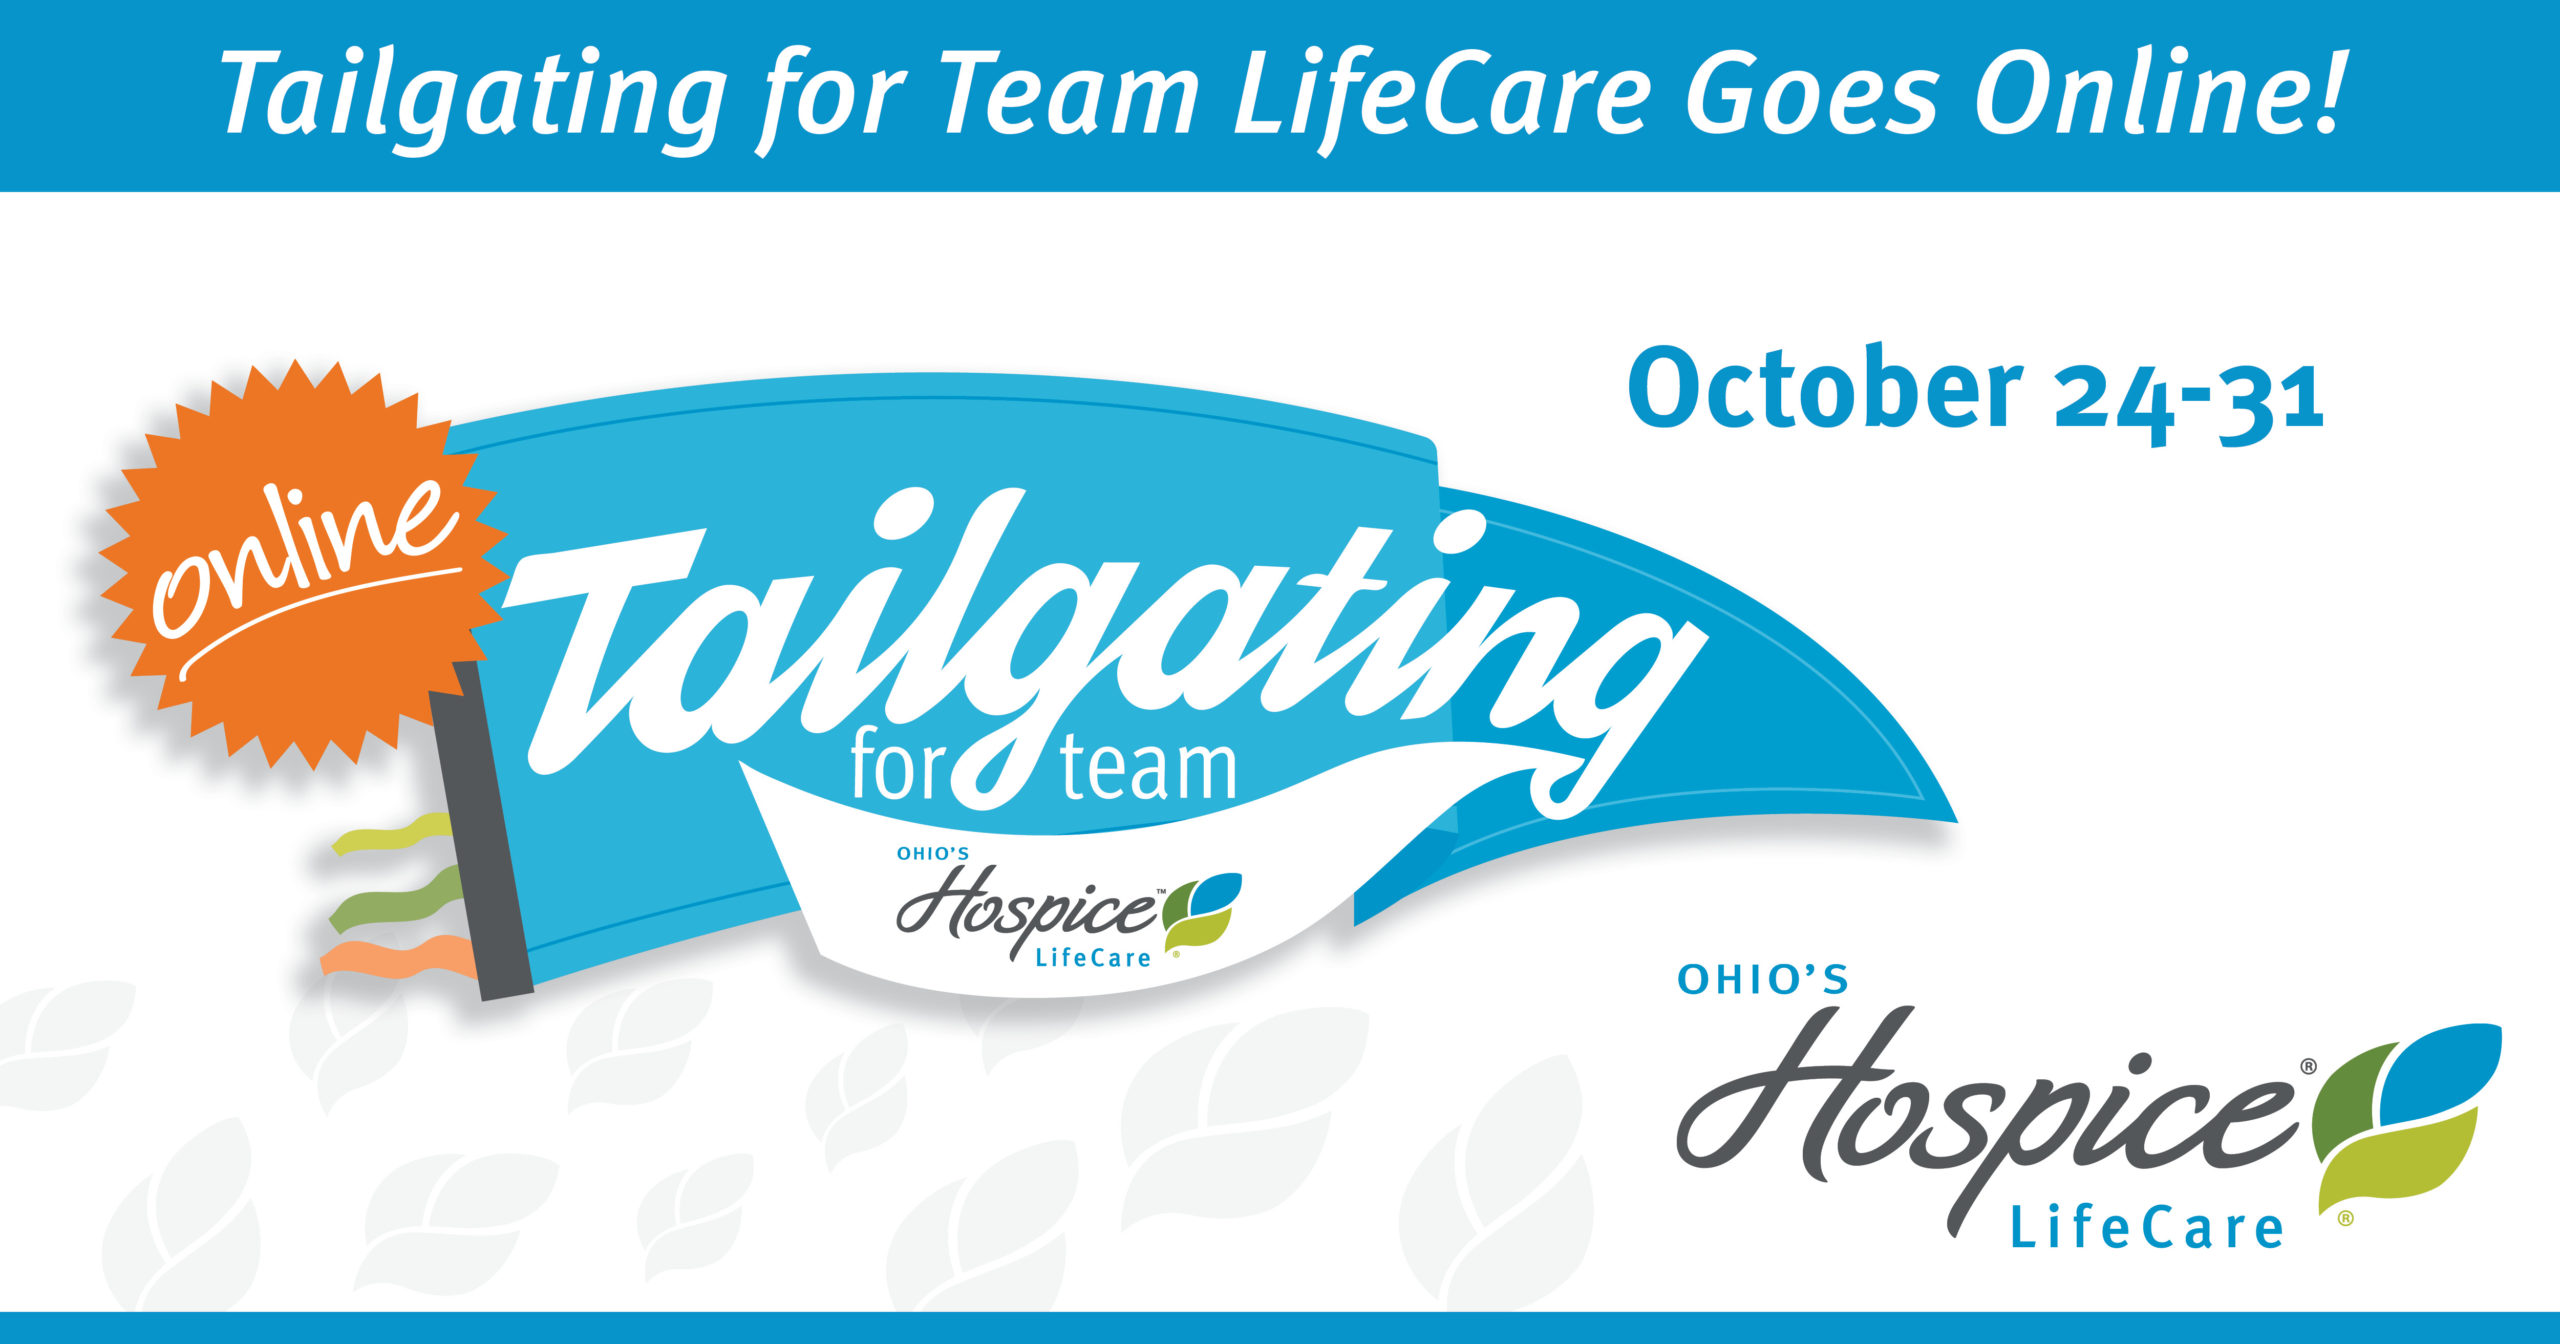 Tailgating for Team LifeCare